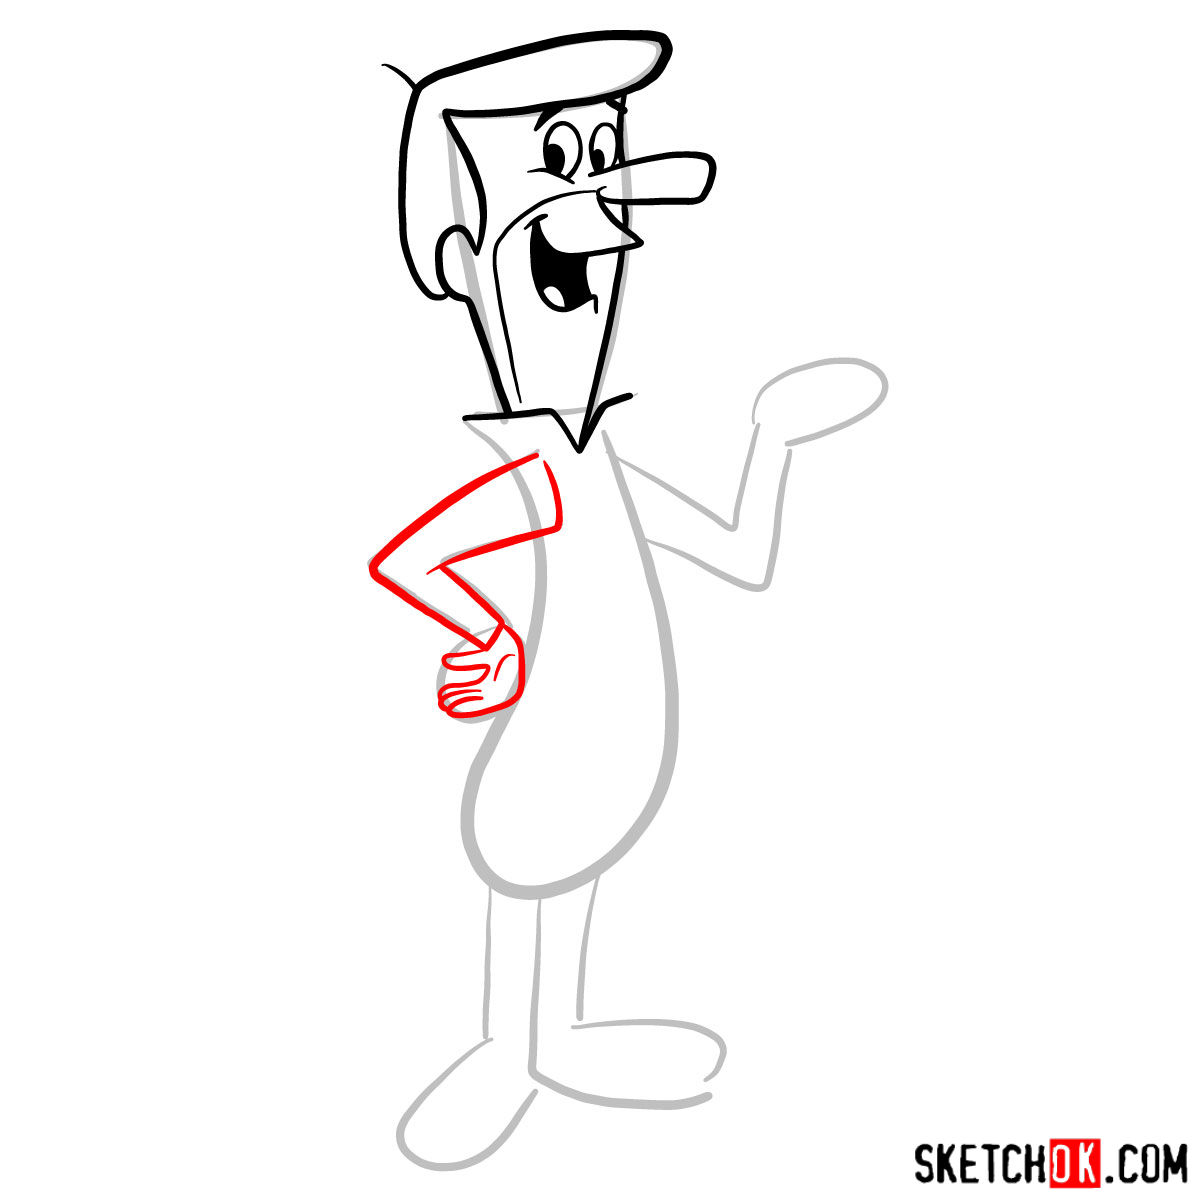 How to draw George Jetson - step 05